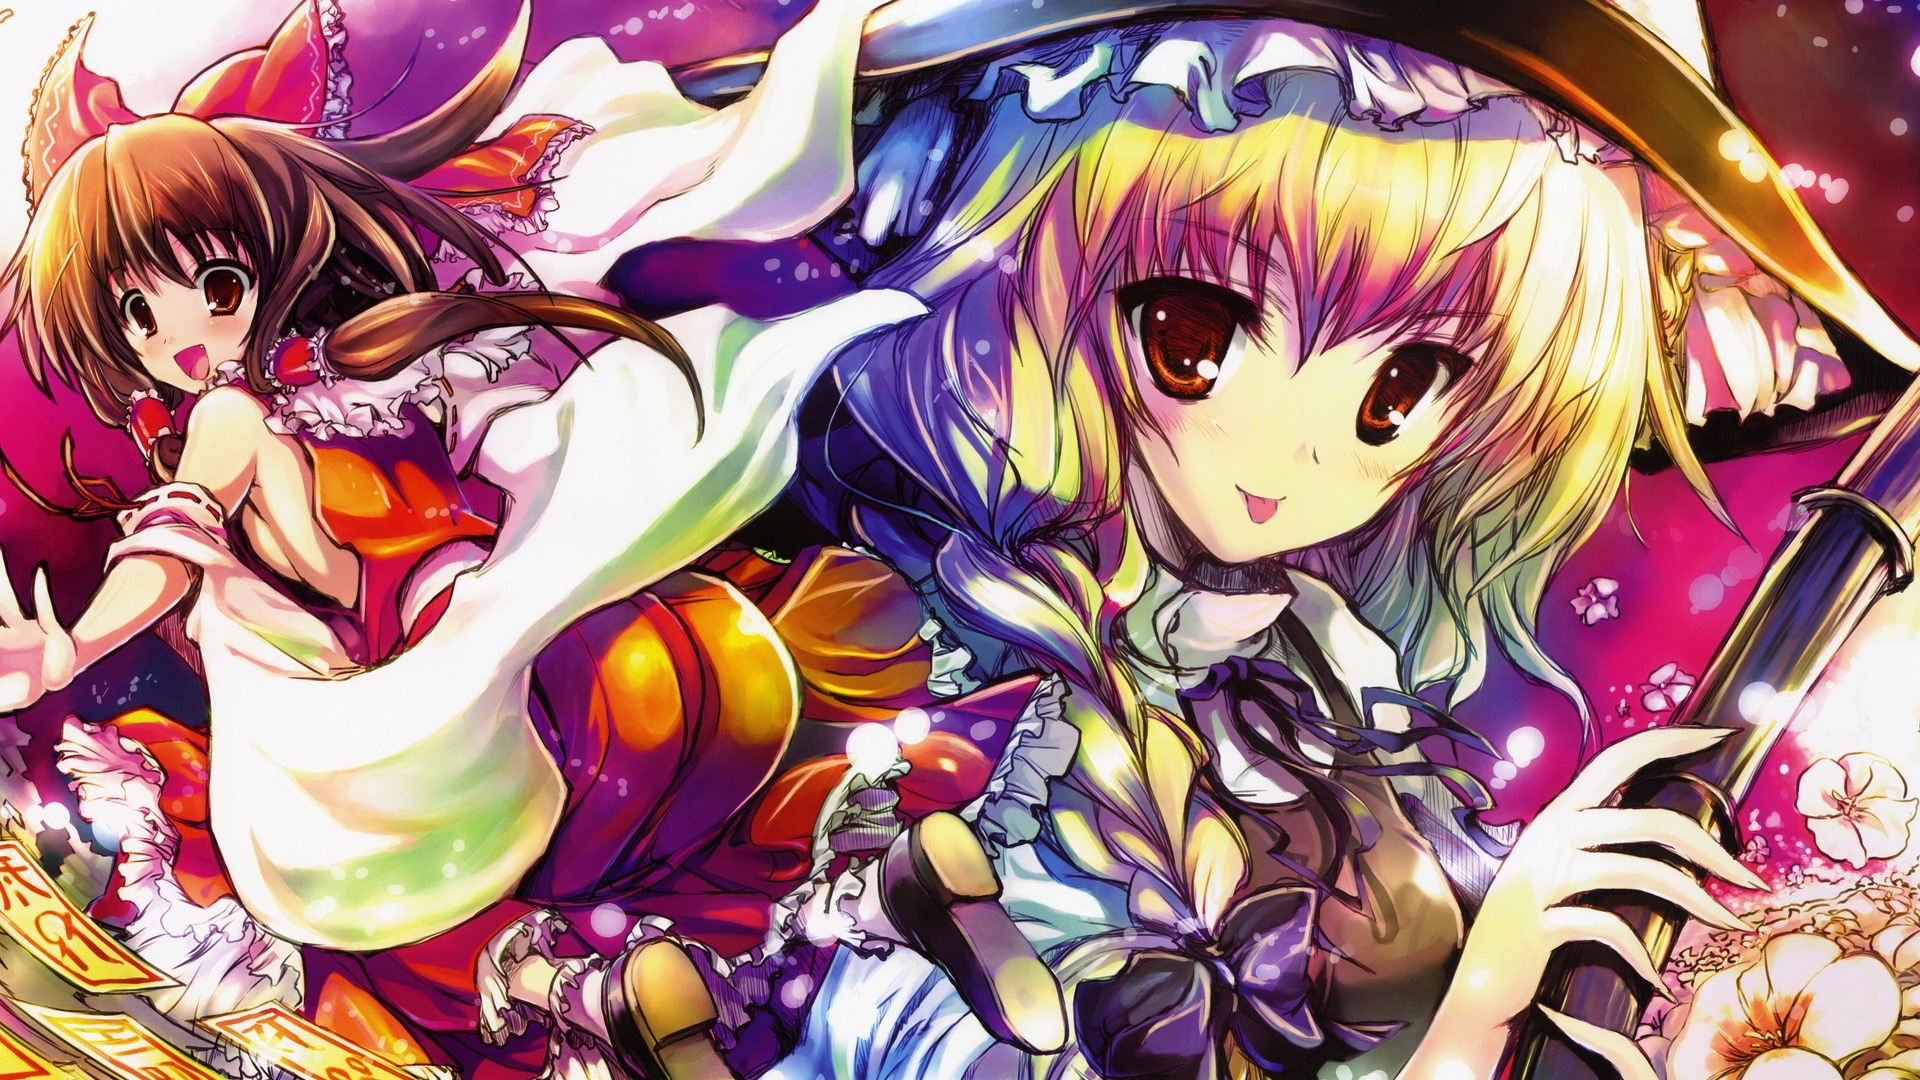 Touhou Project caricature HD wallpapers #12 - 1920x1080